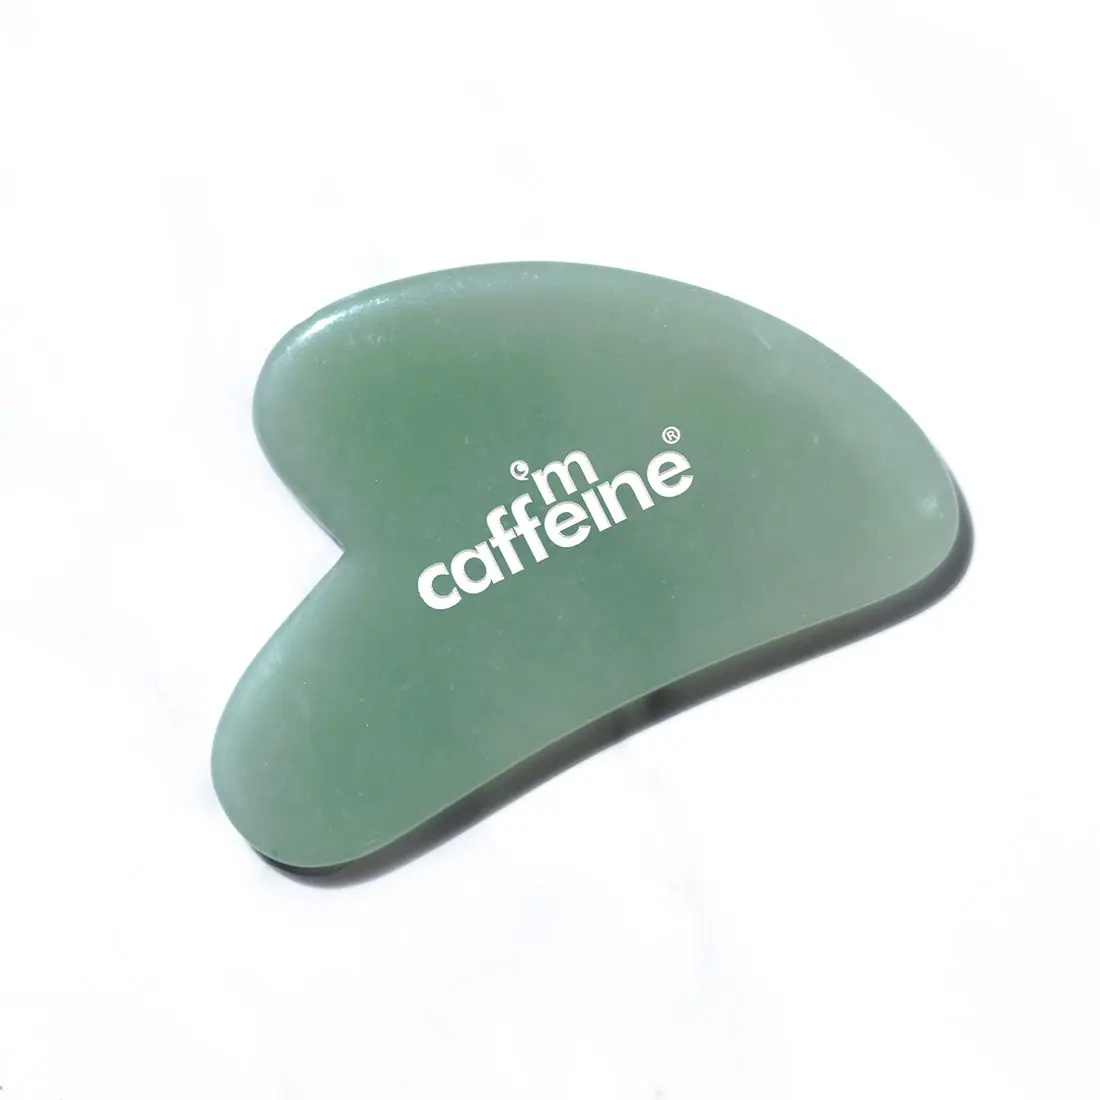 mCaffeine Gua Sha - Green Quartz Face Massaging Stone | For Skin Toning, Reducing Puffiness & Skin Elasticity | For Men & Women | Made with Aventurine | Loaded with Positive Energy & Vitality